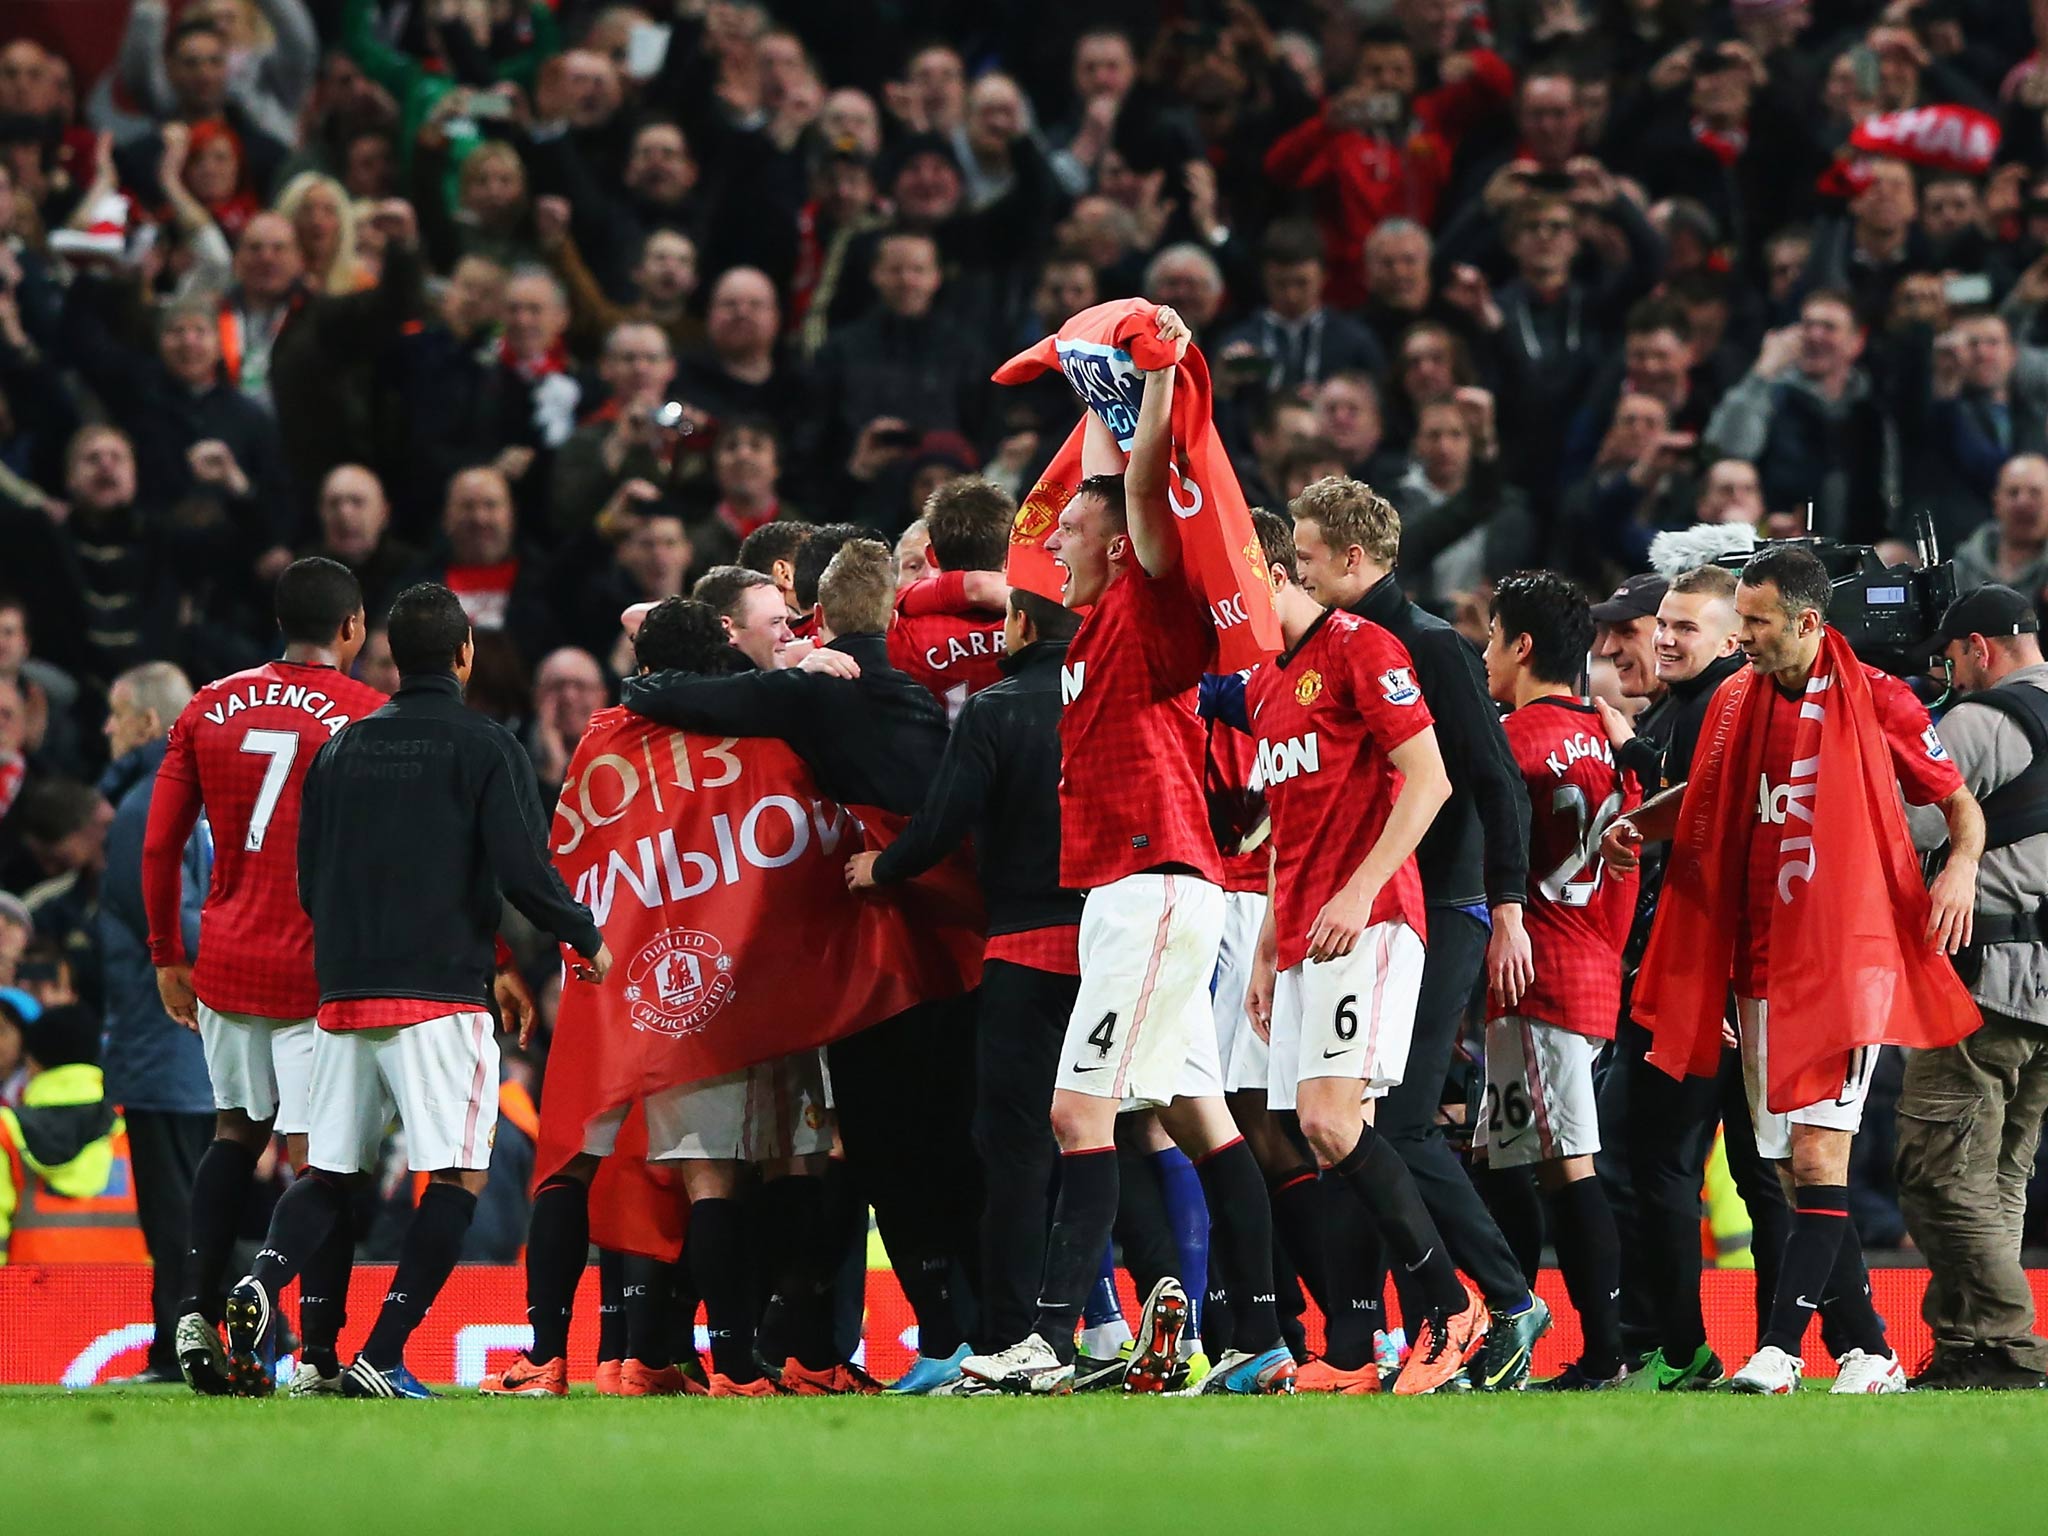 Manchester United celebrate after securing the Premier League title